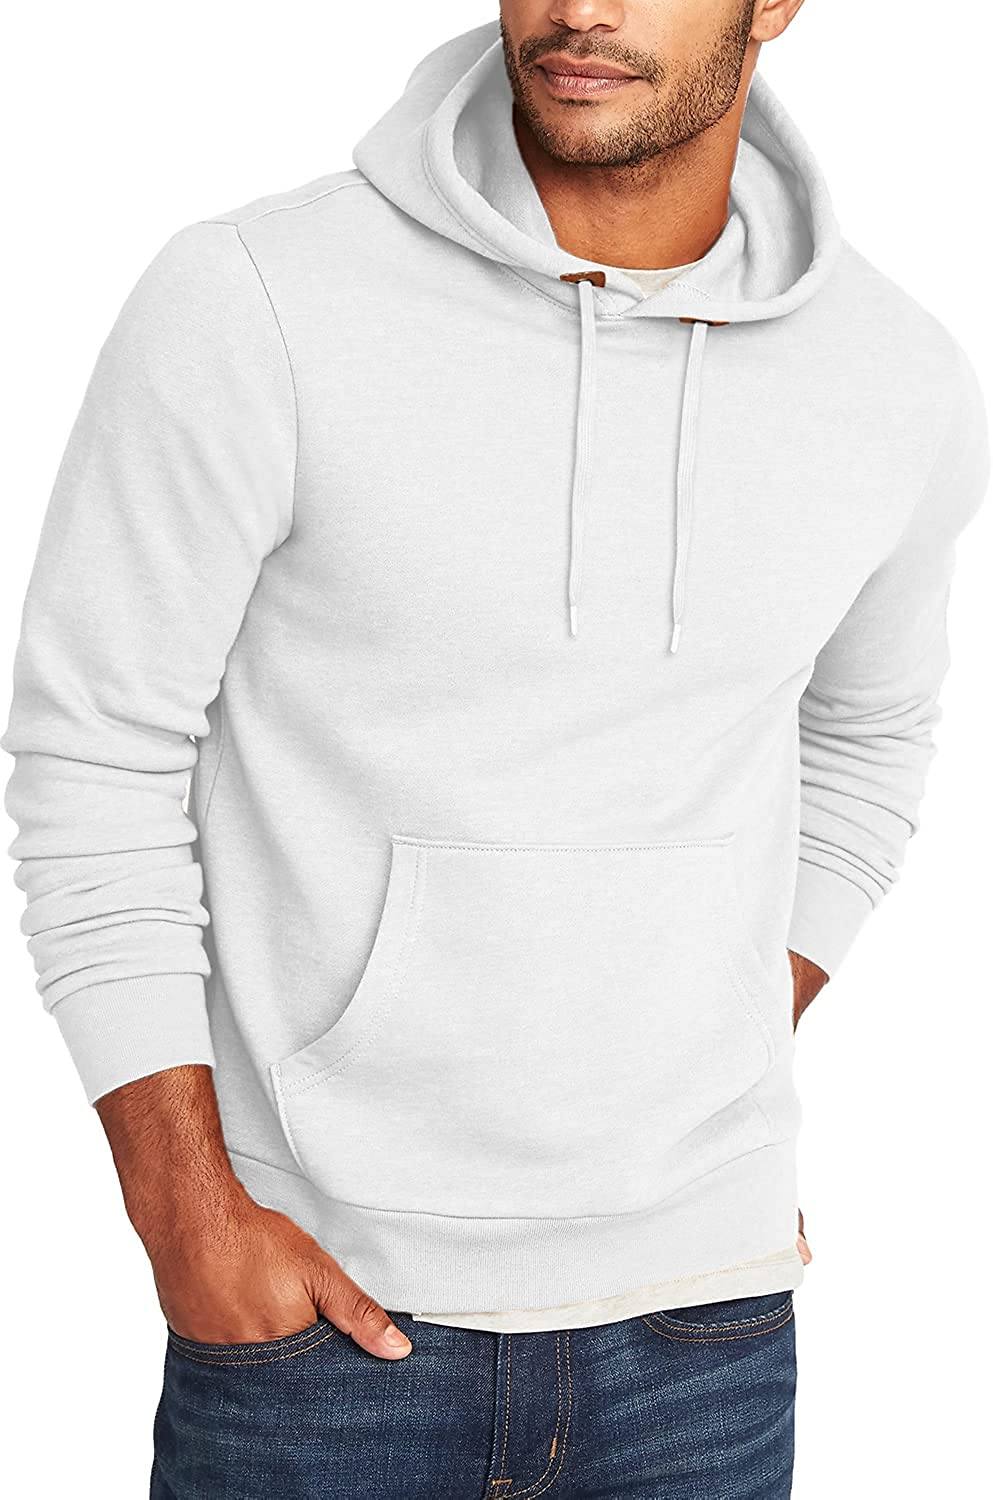 COOFANDY Men's Athletic Hoodie Long Sleeve Drawstring Sports Pullover Hooded Casual Fashion Sweatshirt with Pockets Fashion Hoodies & Sweatshirts Coofandy's White Small 